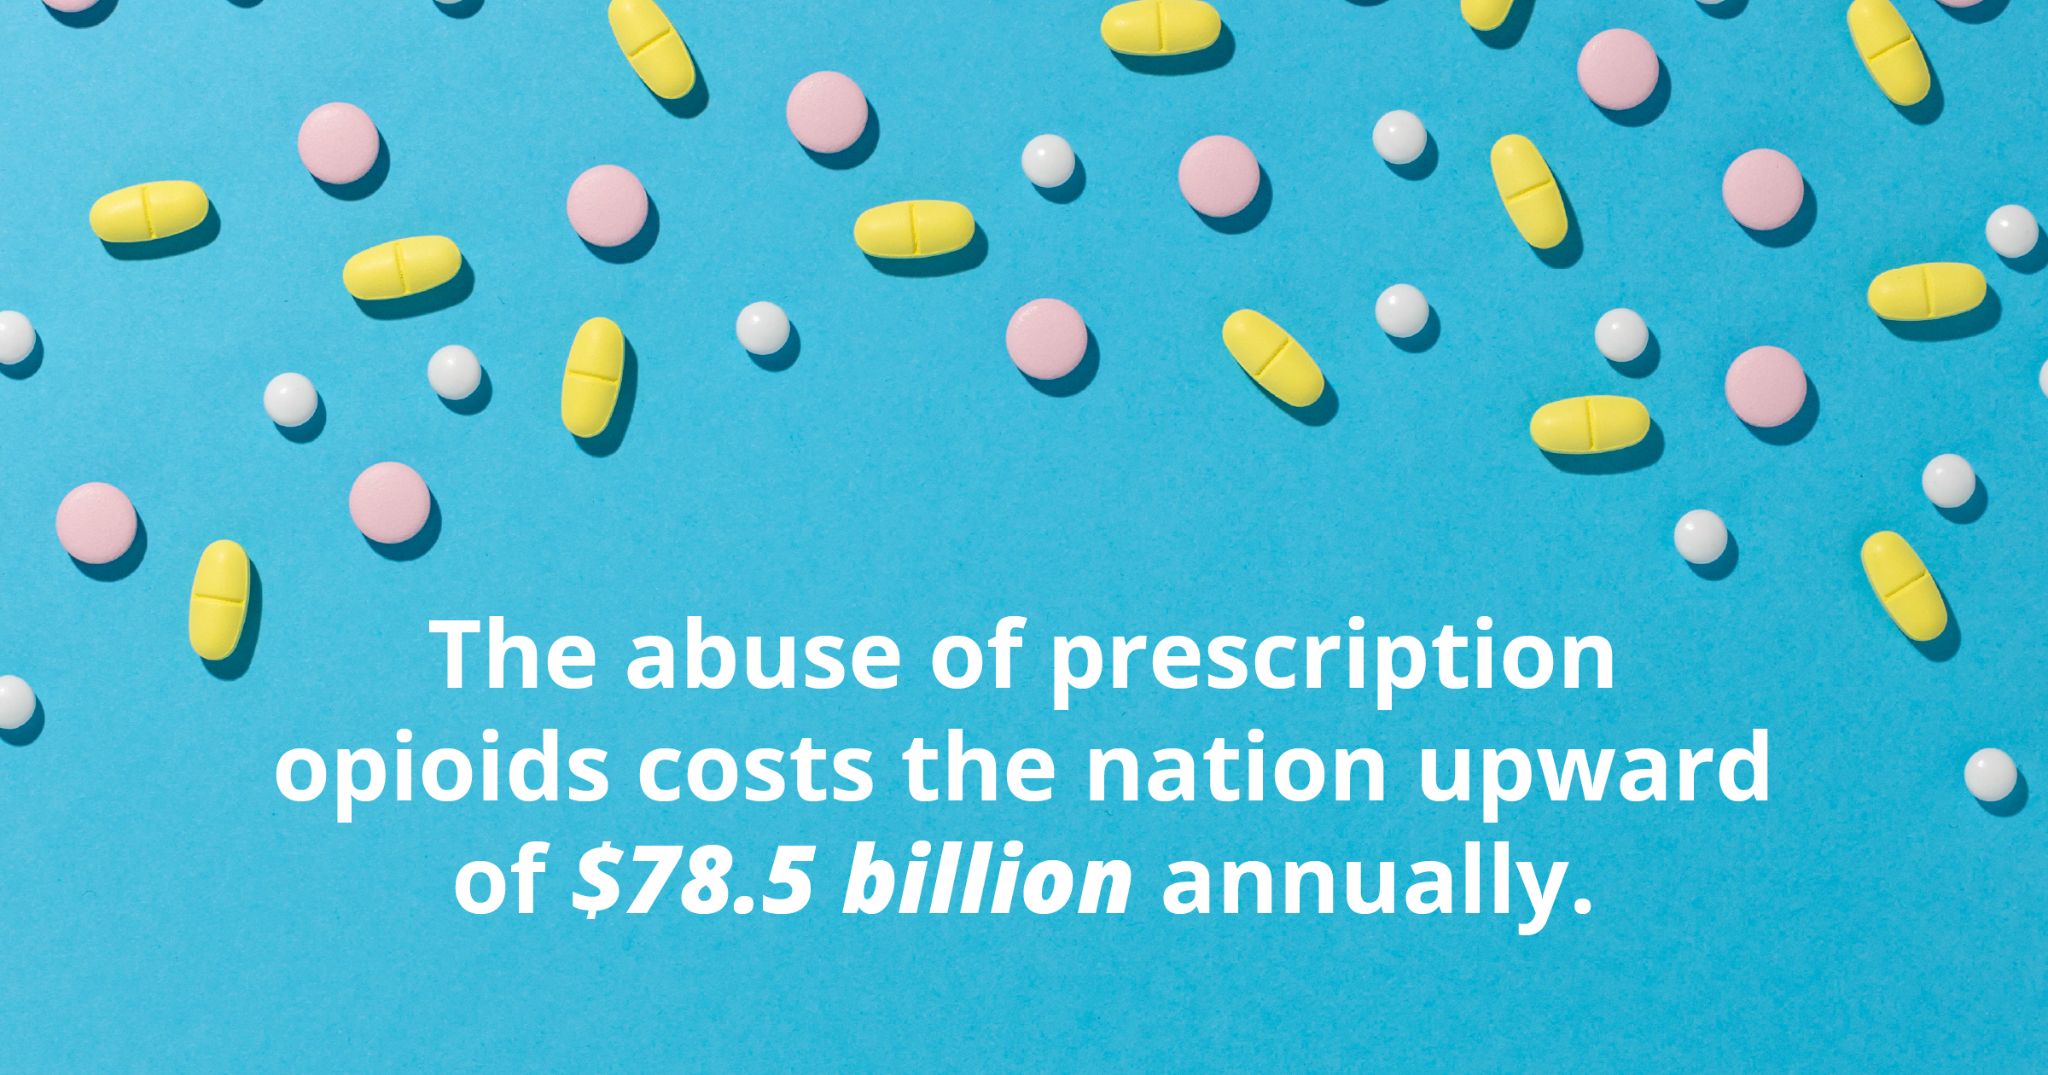 The abuse of prescription opioid costs the nation upward of 78.5 billion annually